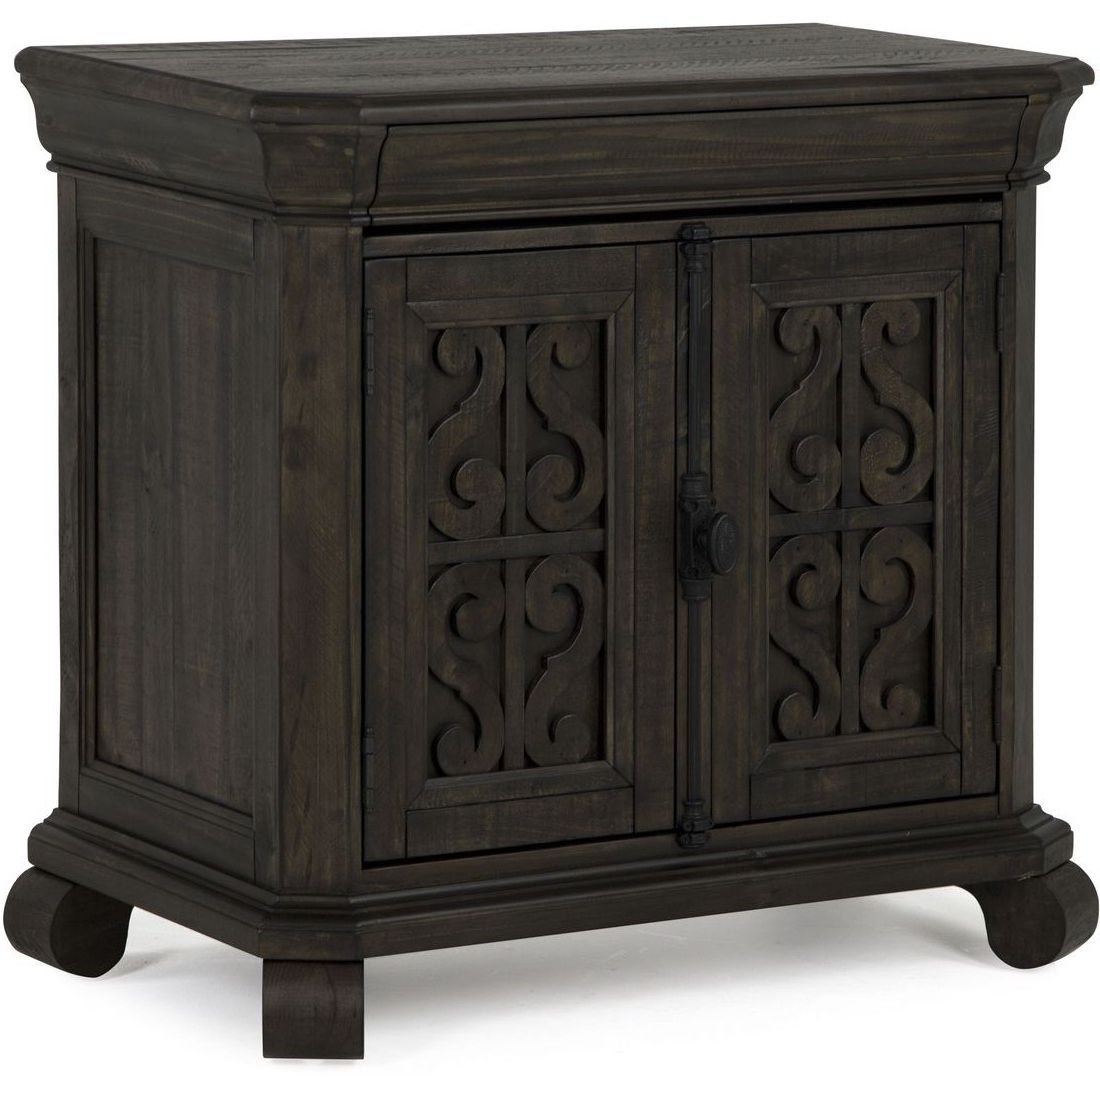 Magnussen Bellamy Bachelor Door Chest In Peppercorn Pertaining To Most Current Bellamy Traditional Weathered Peppercorn Storage Coffee Tables (View 17 of 20)